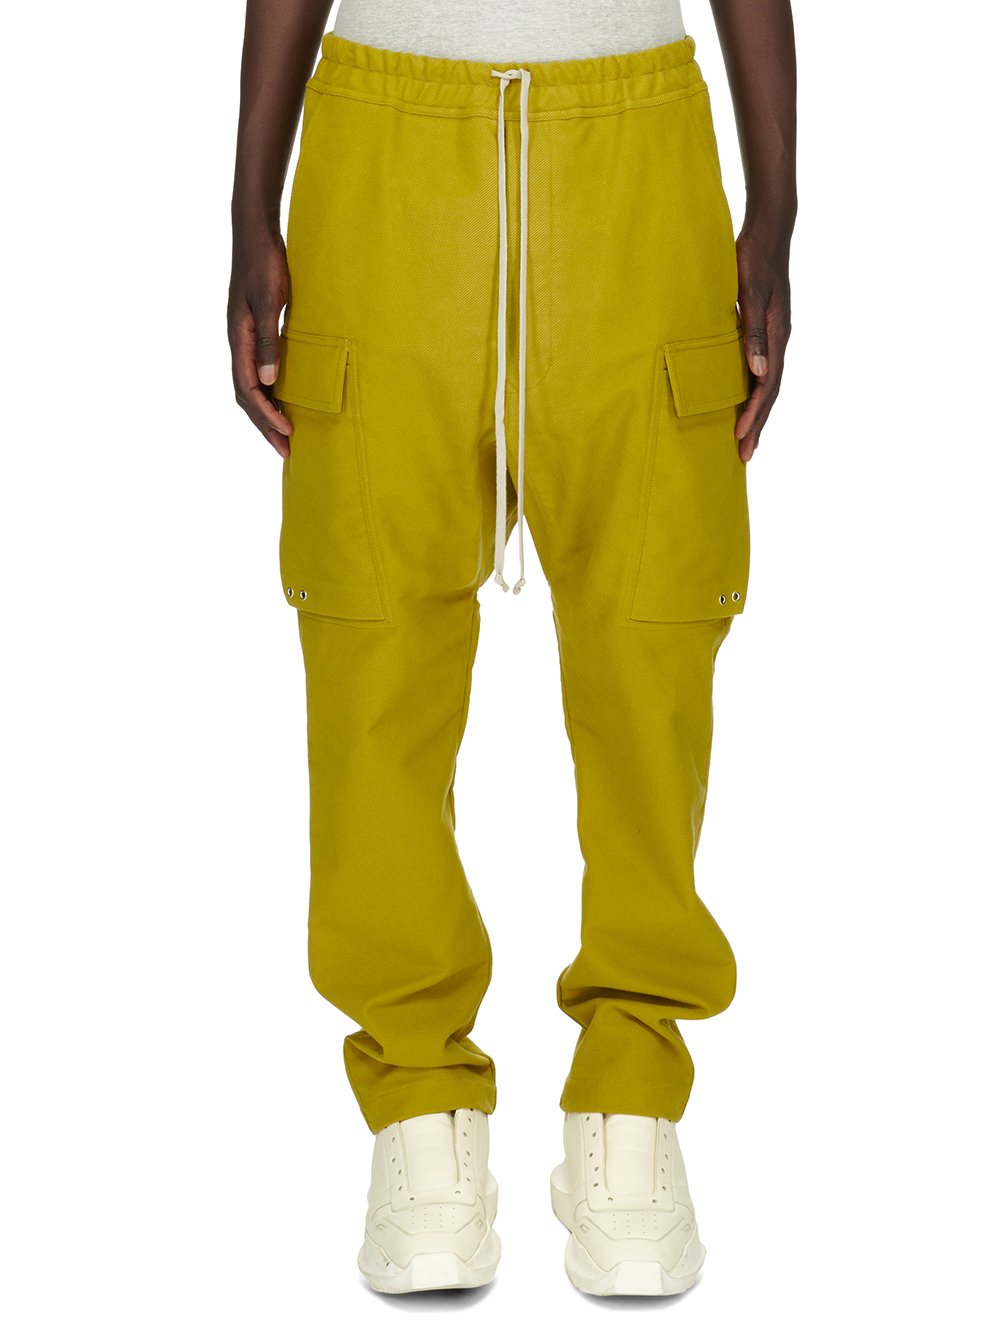 RICK OWENS FW23 LUXOR CARGO LONG IN ACID YELLOW BRUSHED HEAVY TWILL